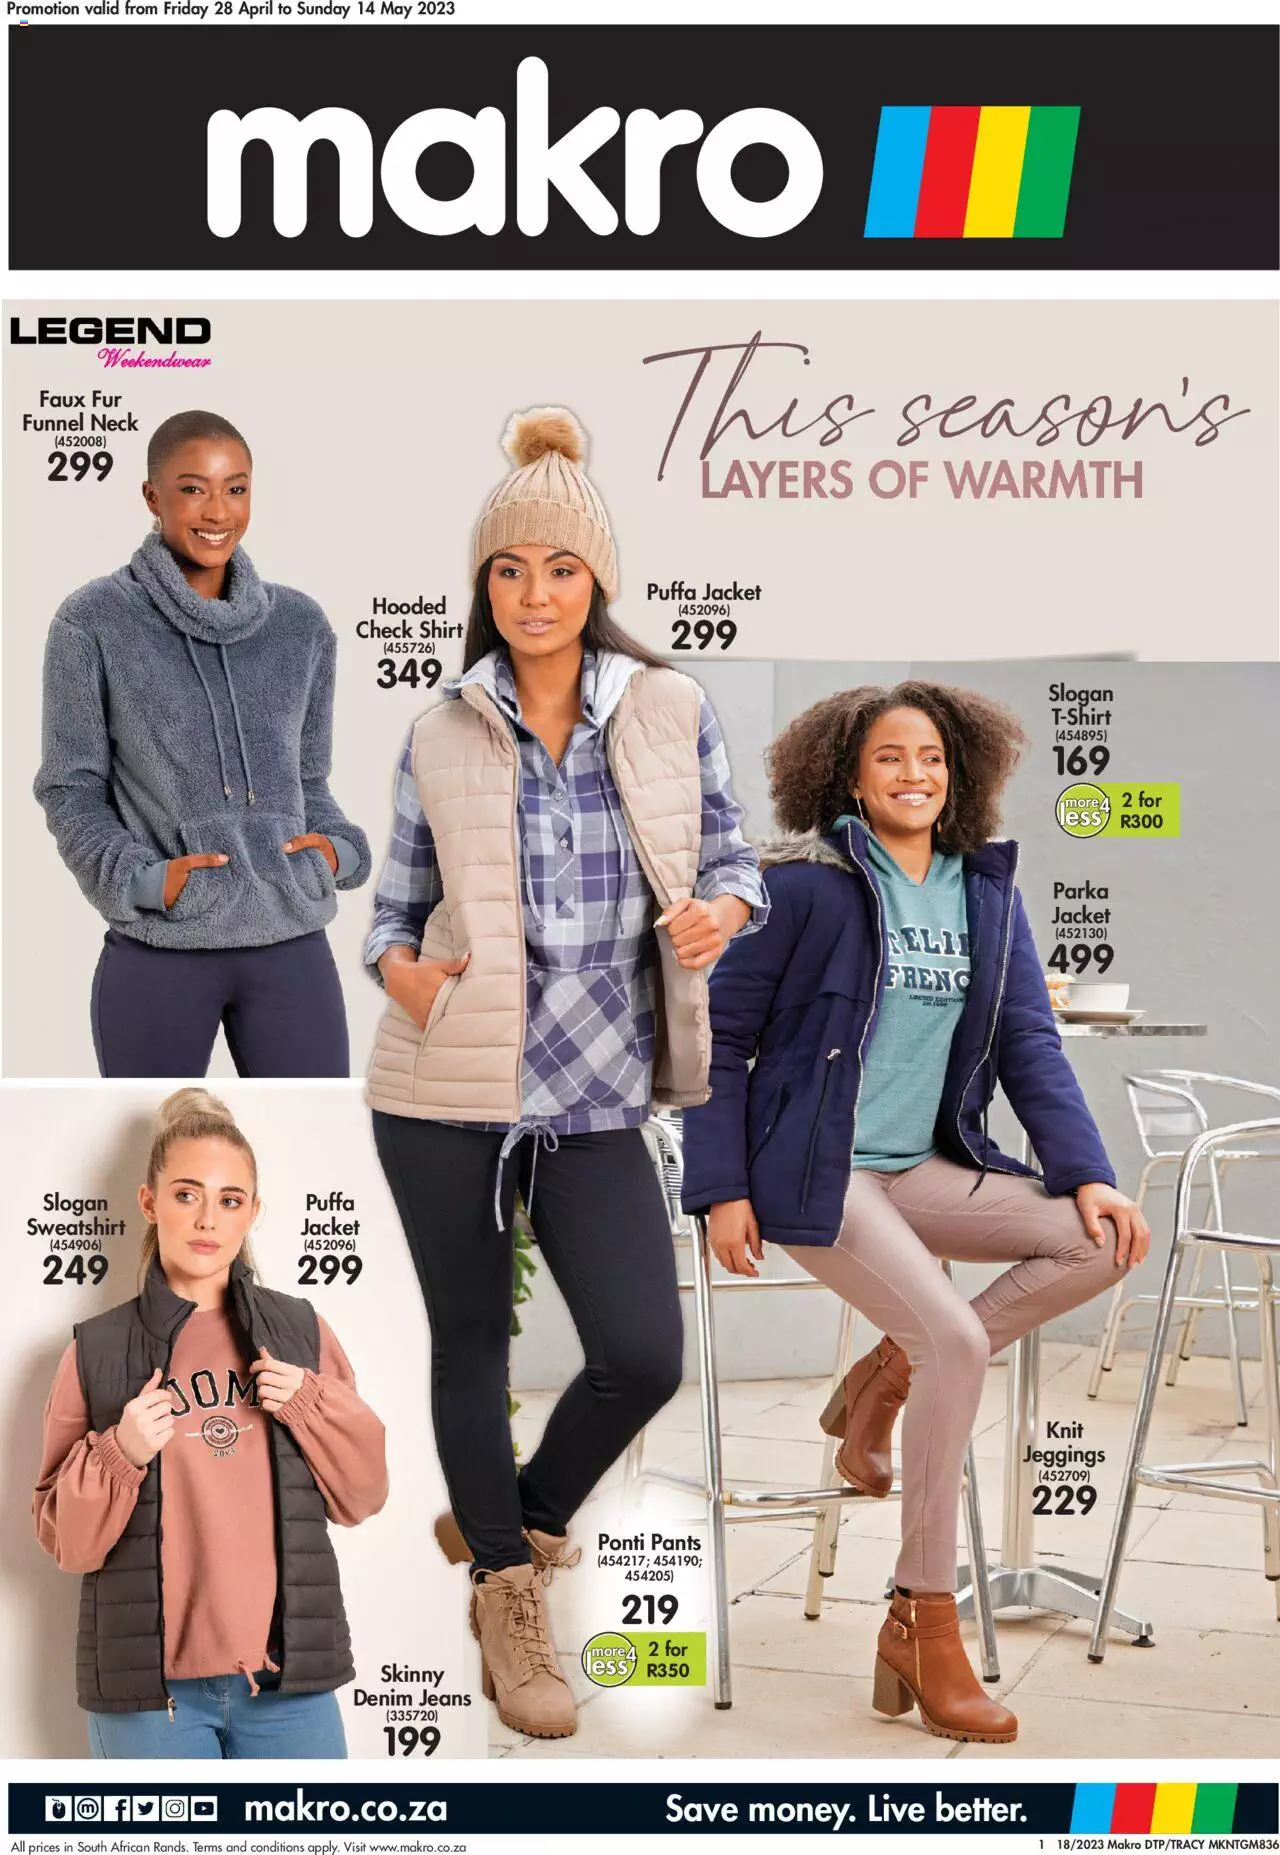 Makro Specials Layers of Warmth 28 Apr – 14 May 2023